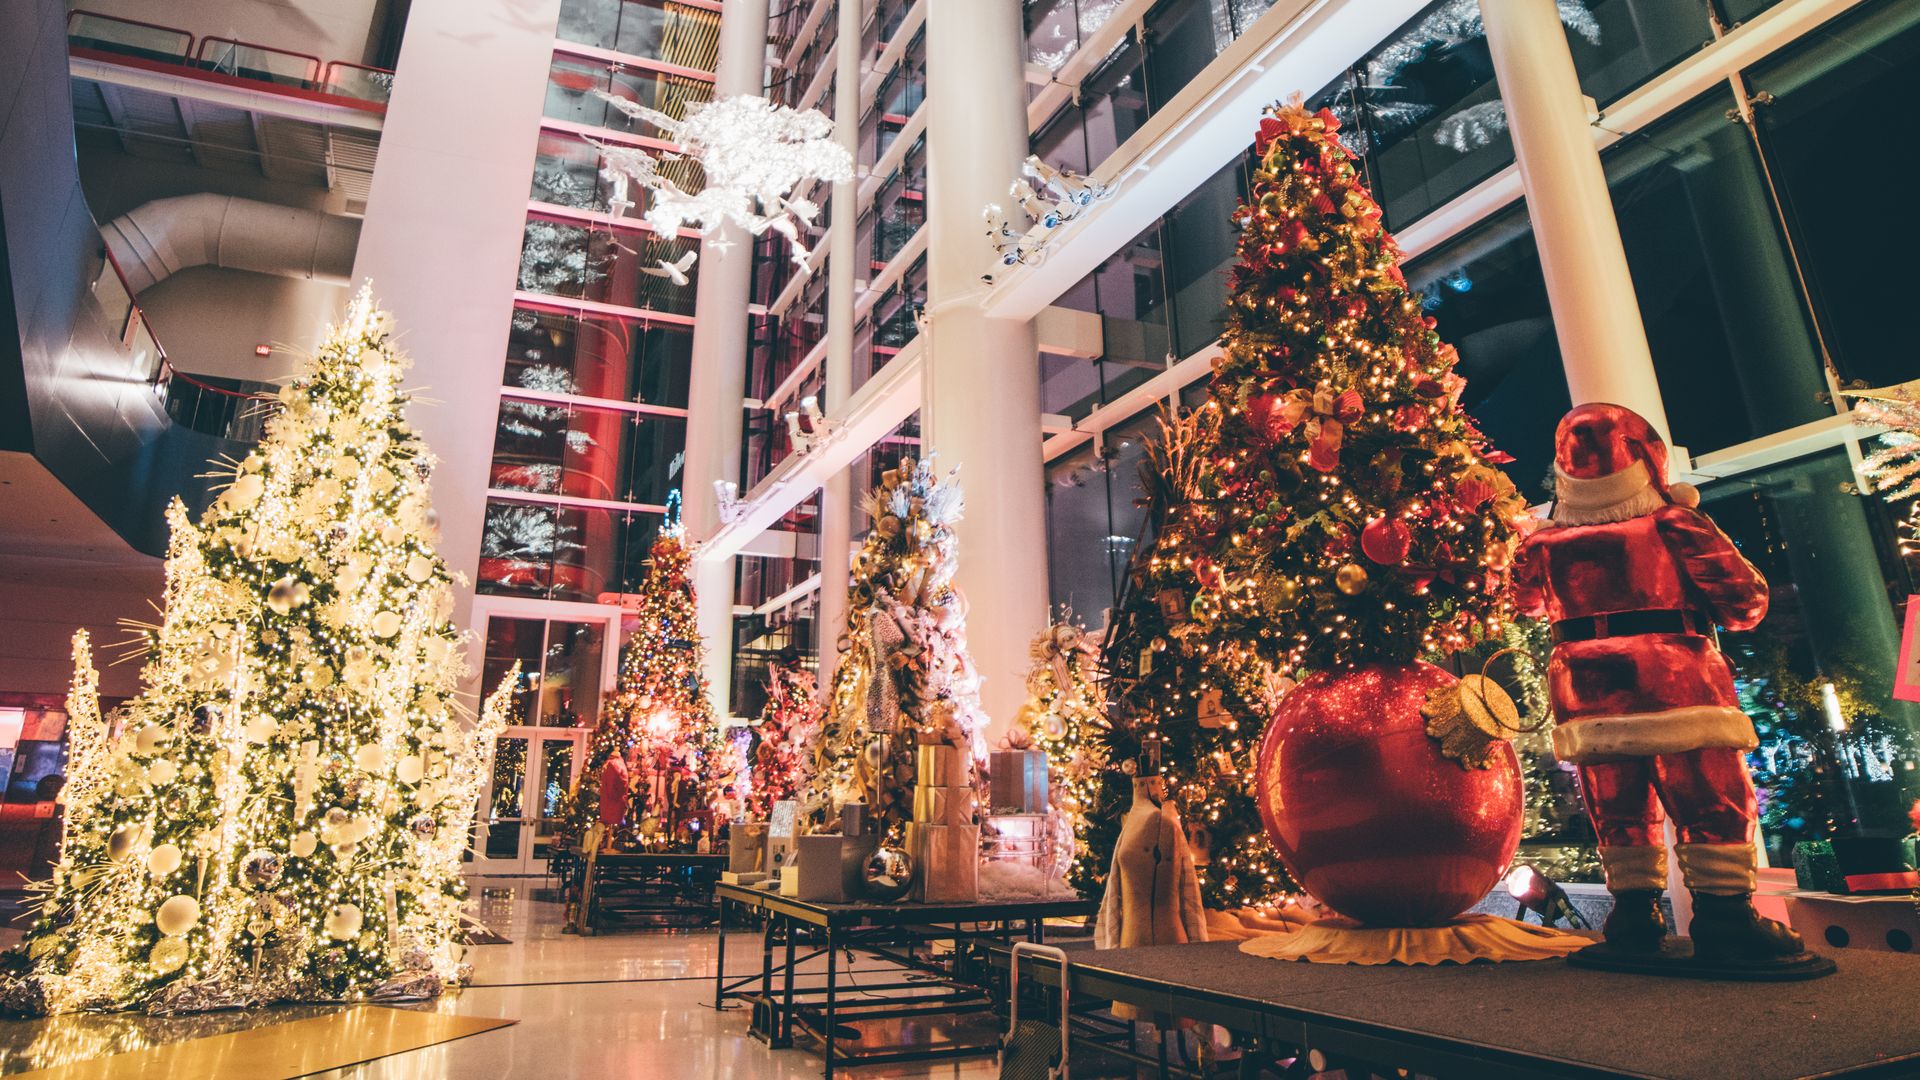 A handful of holiday trees are displayed inside a white building